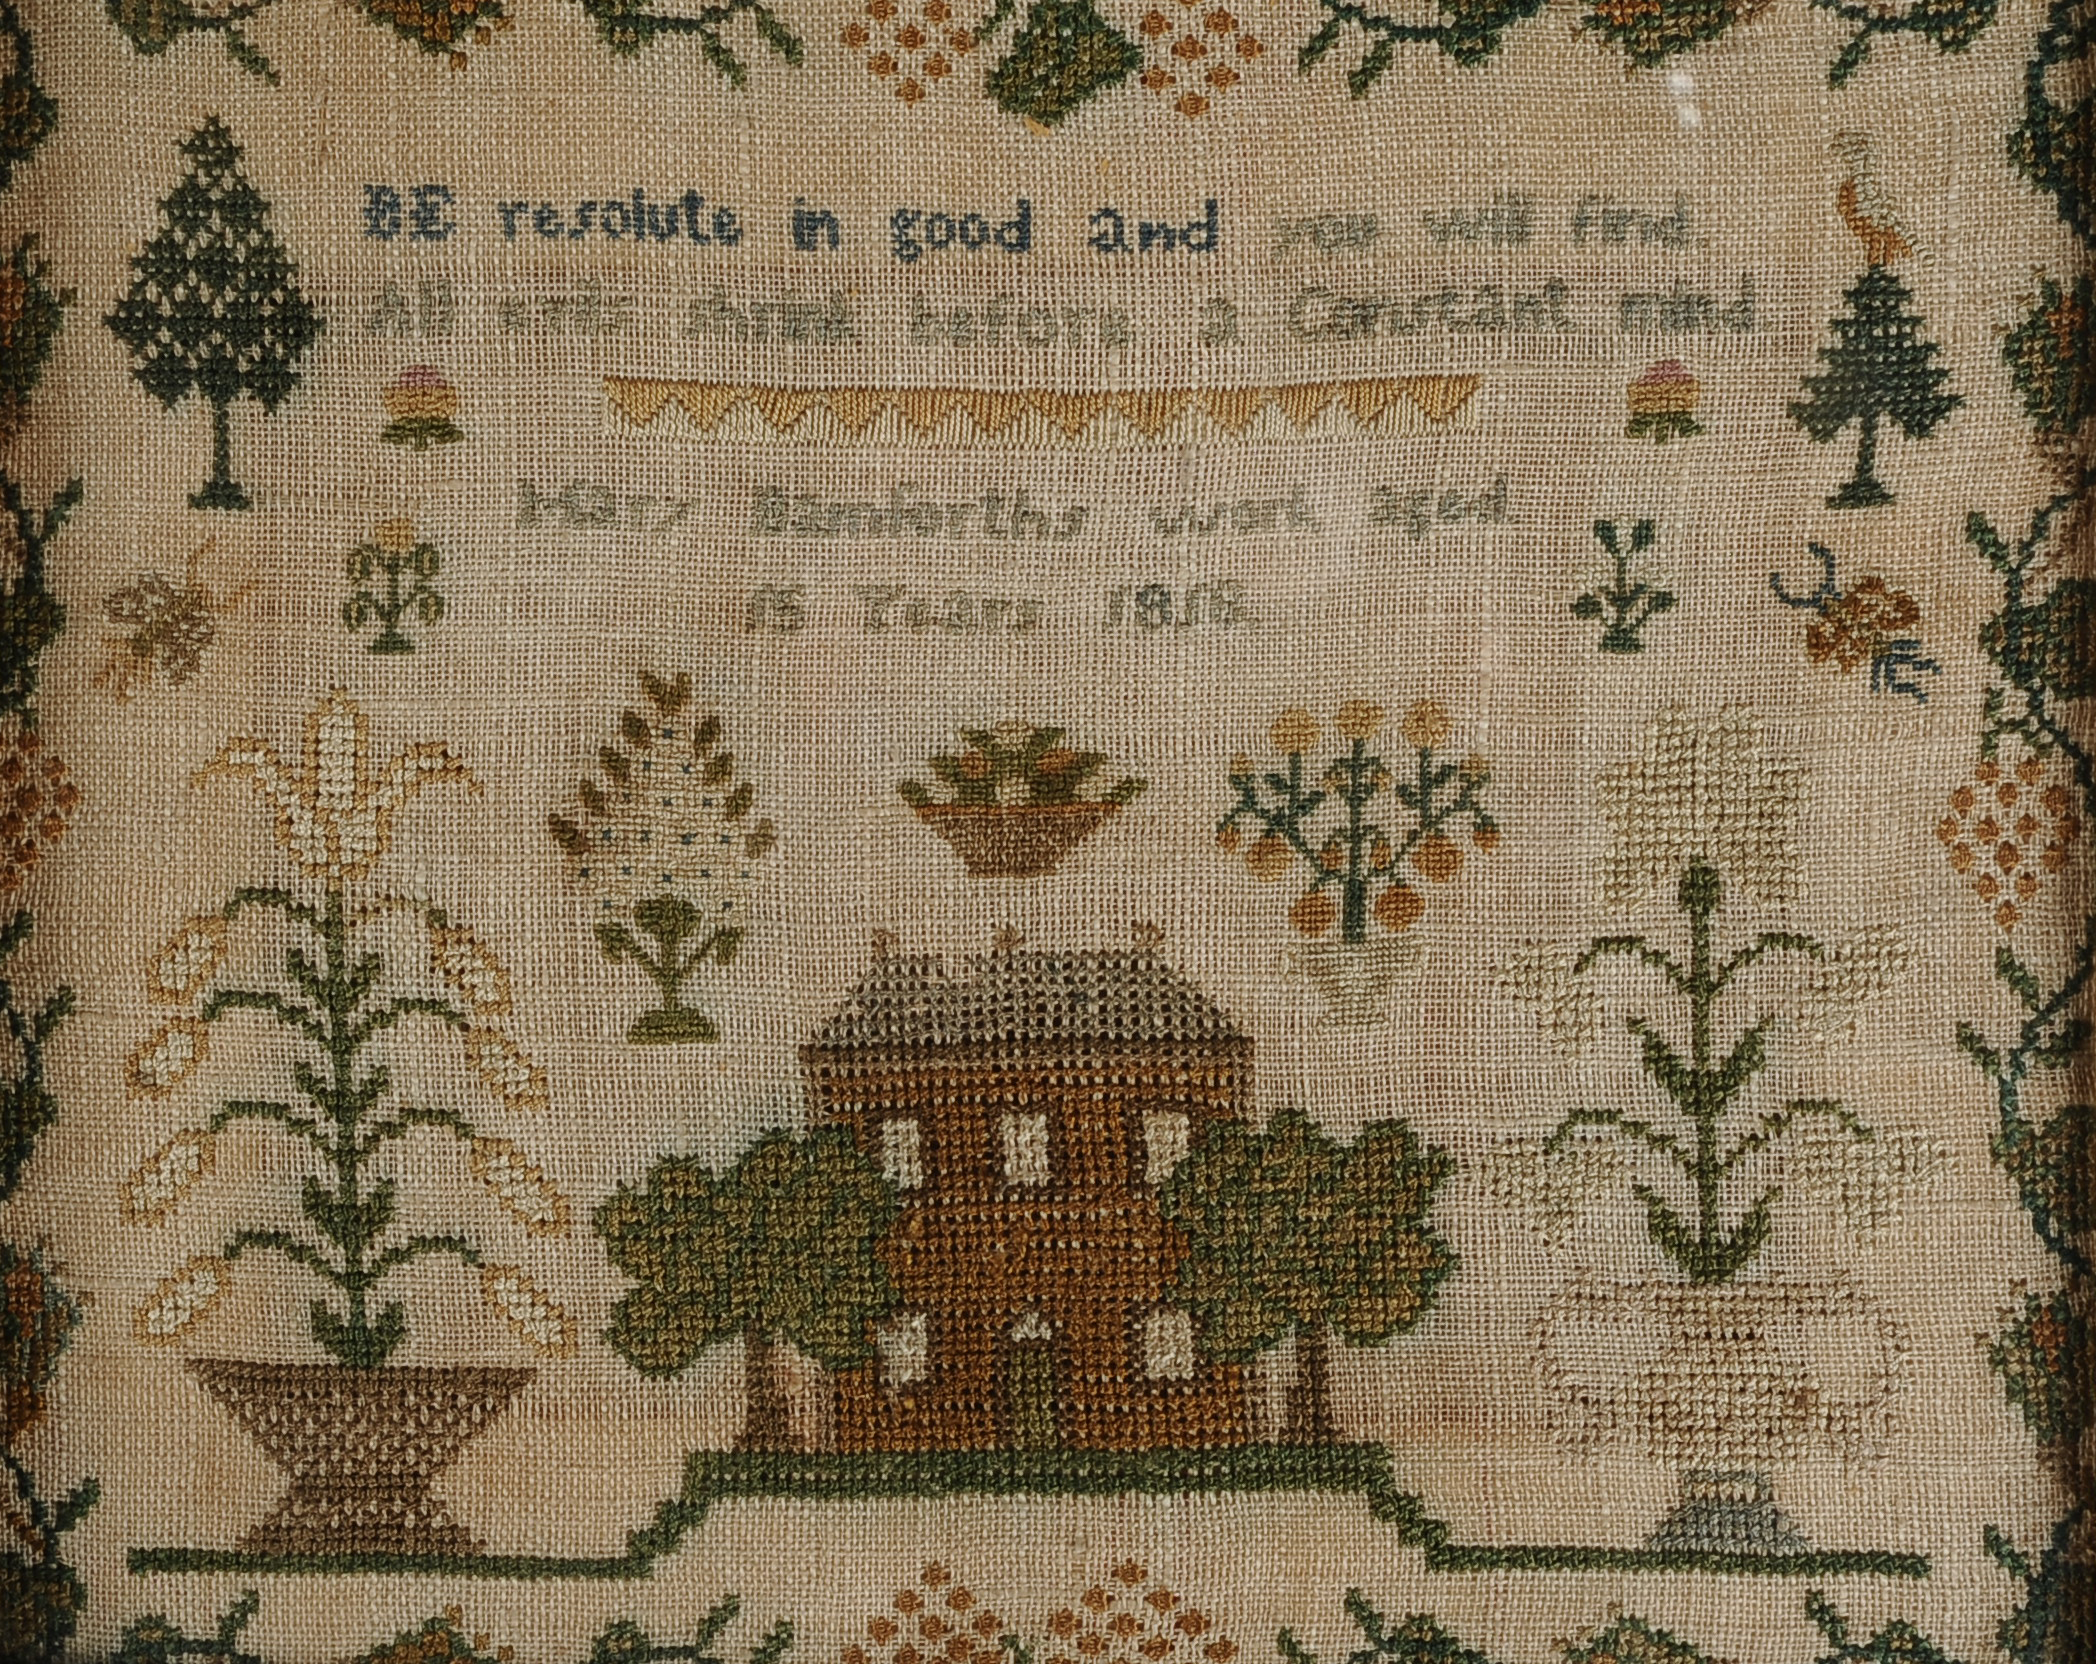 A GEORGE III PERIOD SAMPLER, by Mary Bamforth, aged 15 years and dated 1818, worked in coloured